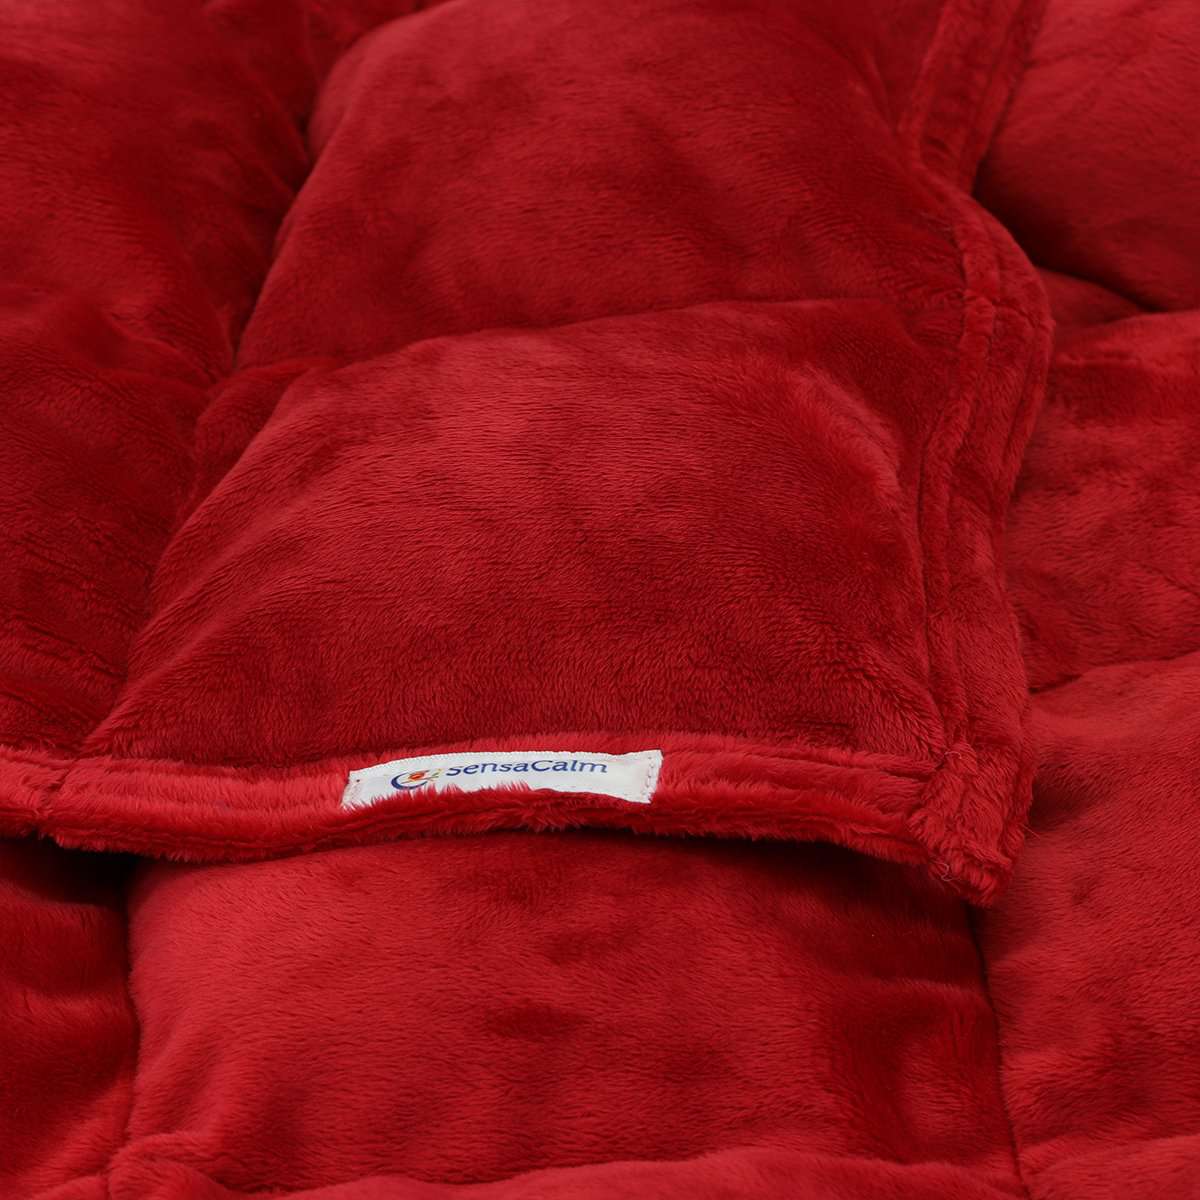 Cuddle Weighted Blanket - Red